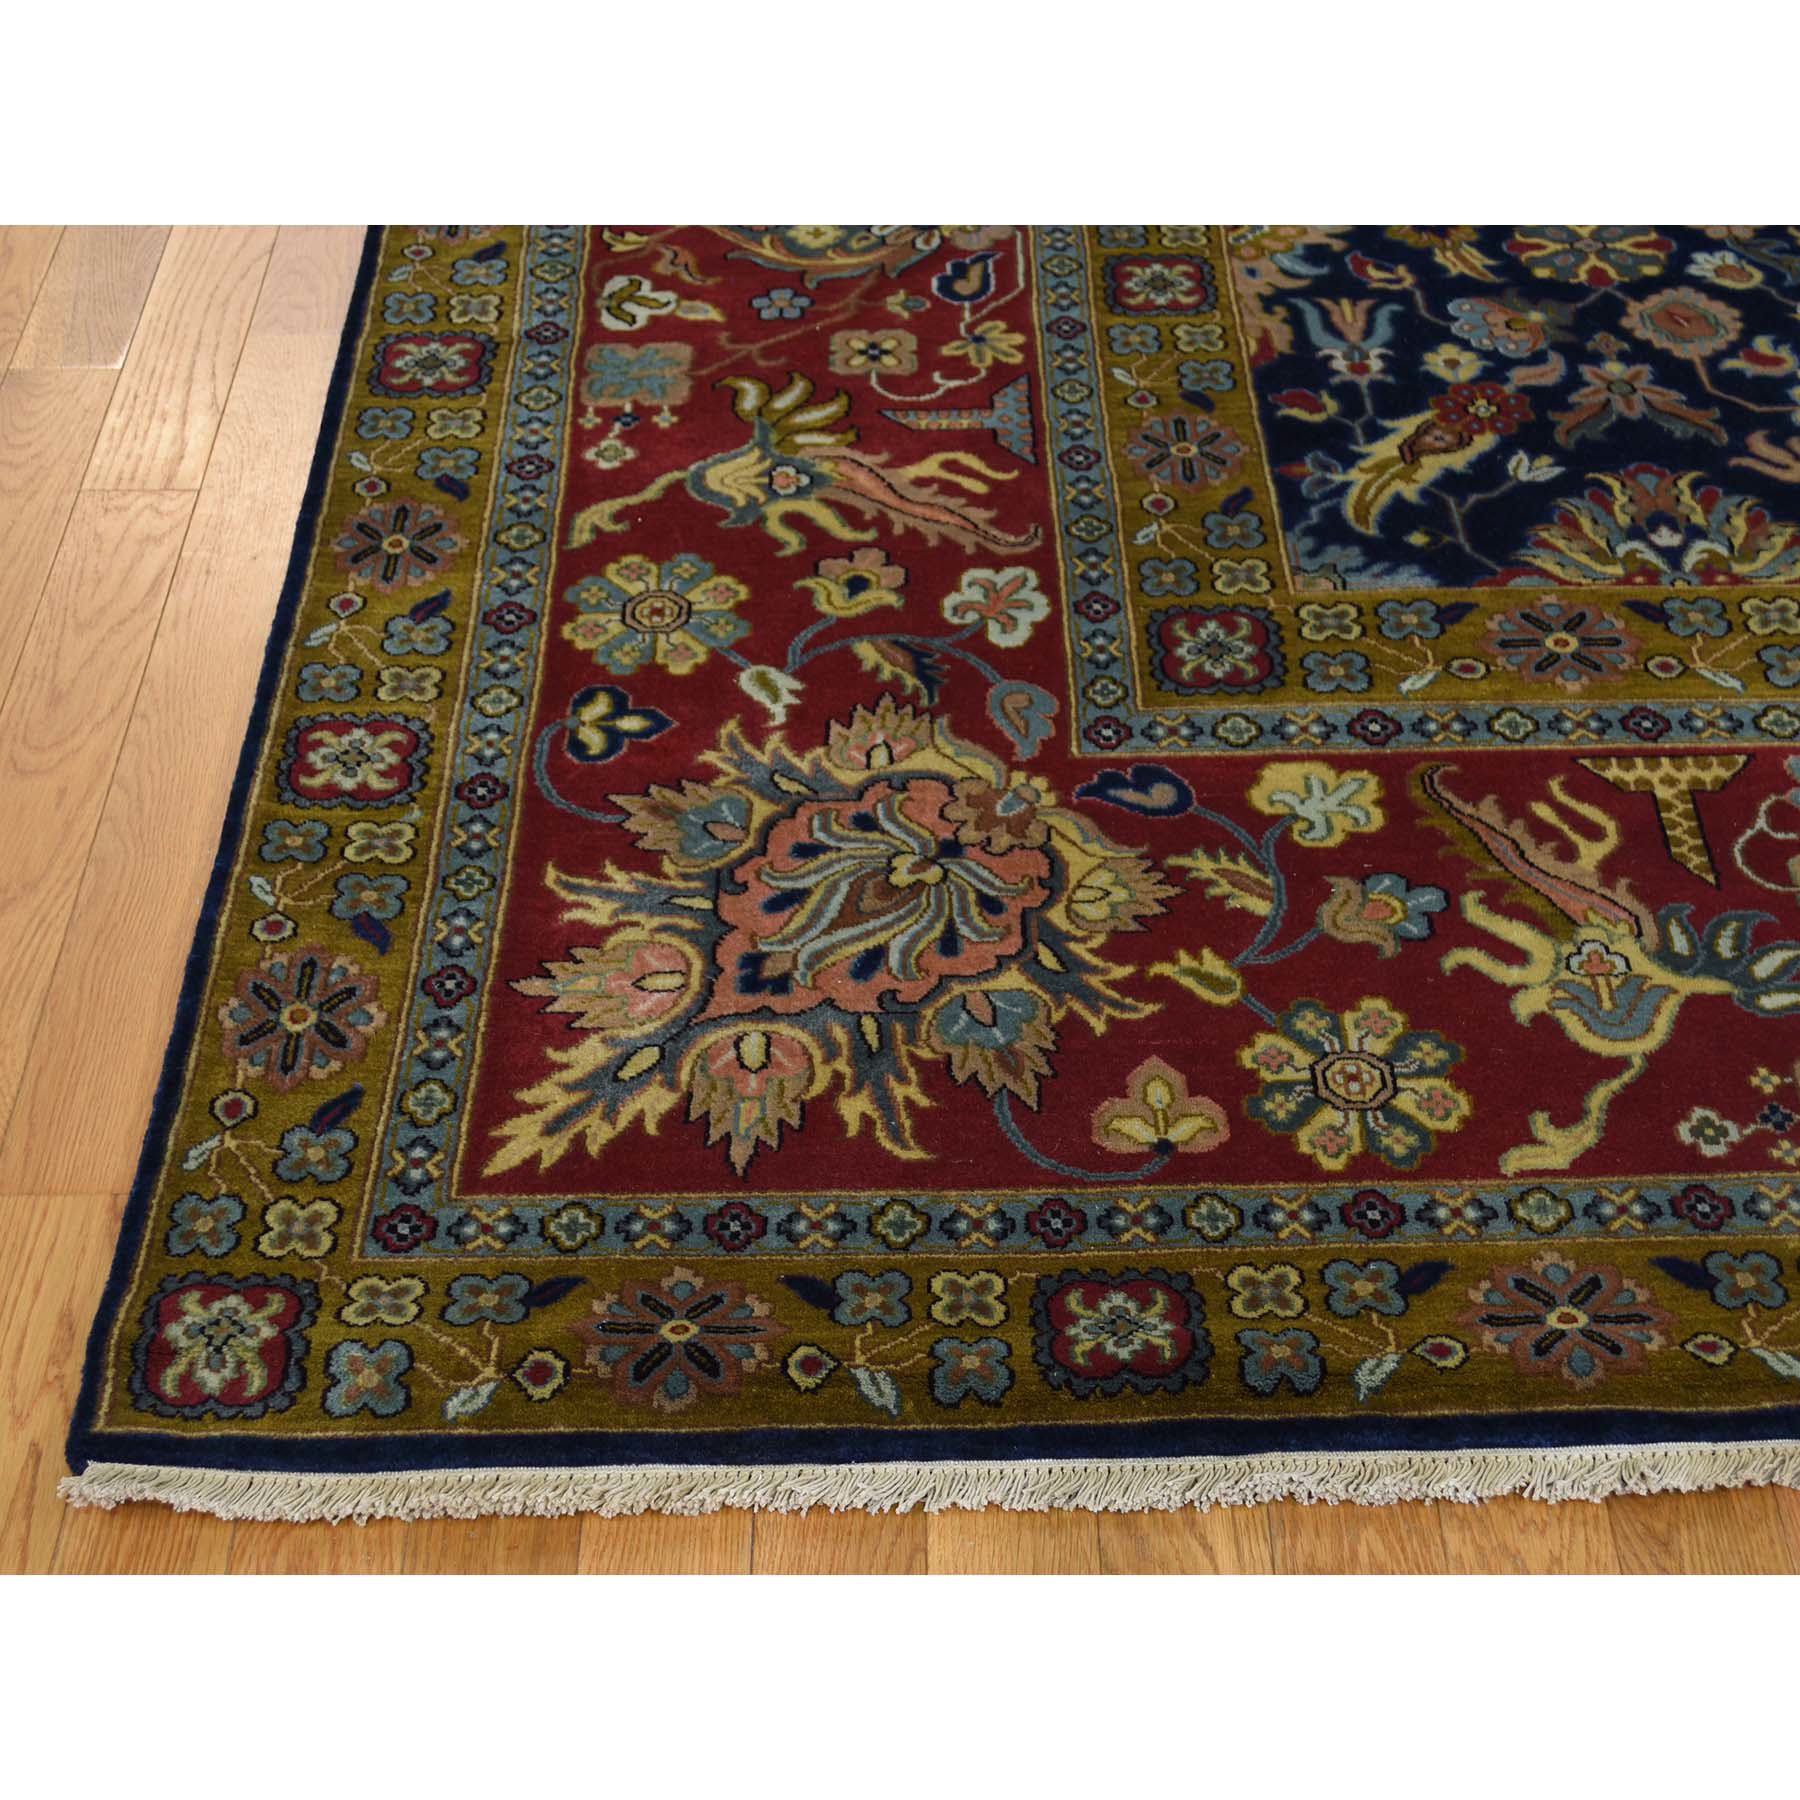 9'1''x12'2'' 300KPSI New Zealand Wool Hand-Knotted Oriental Rug